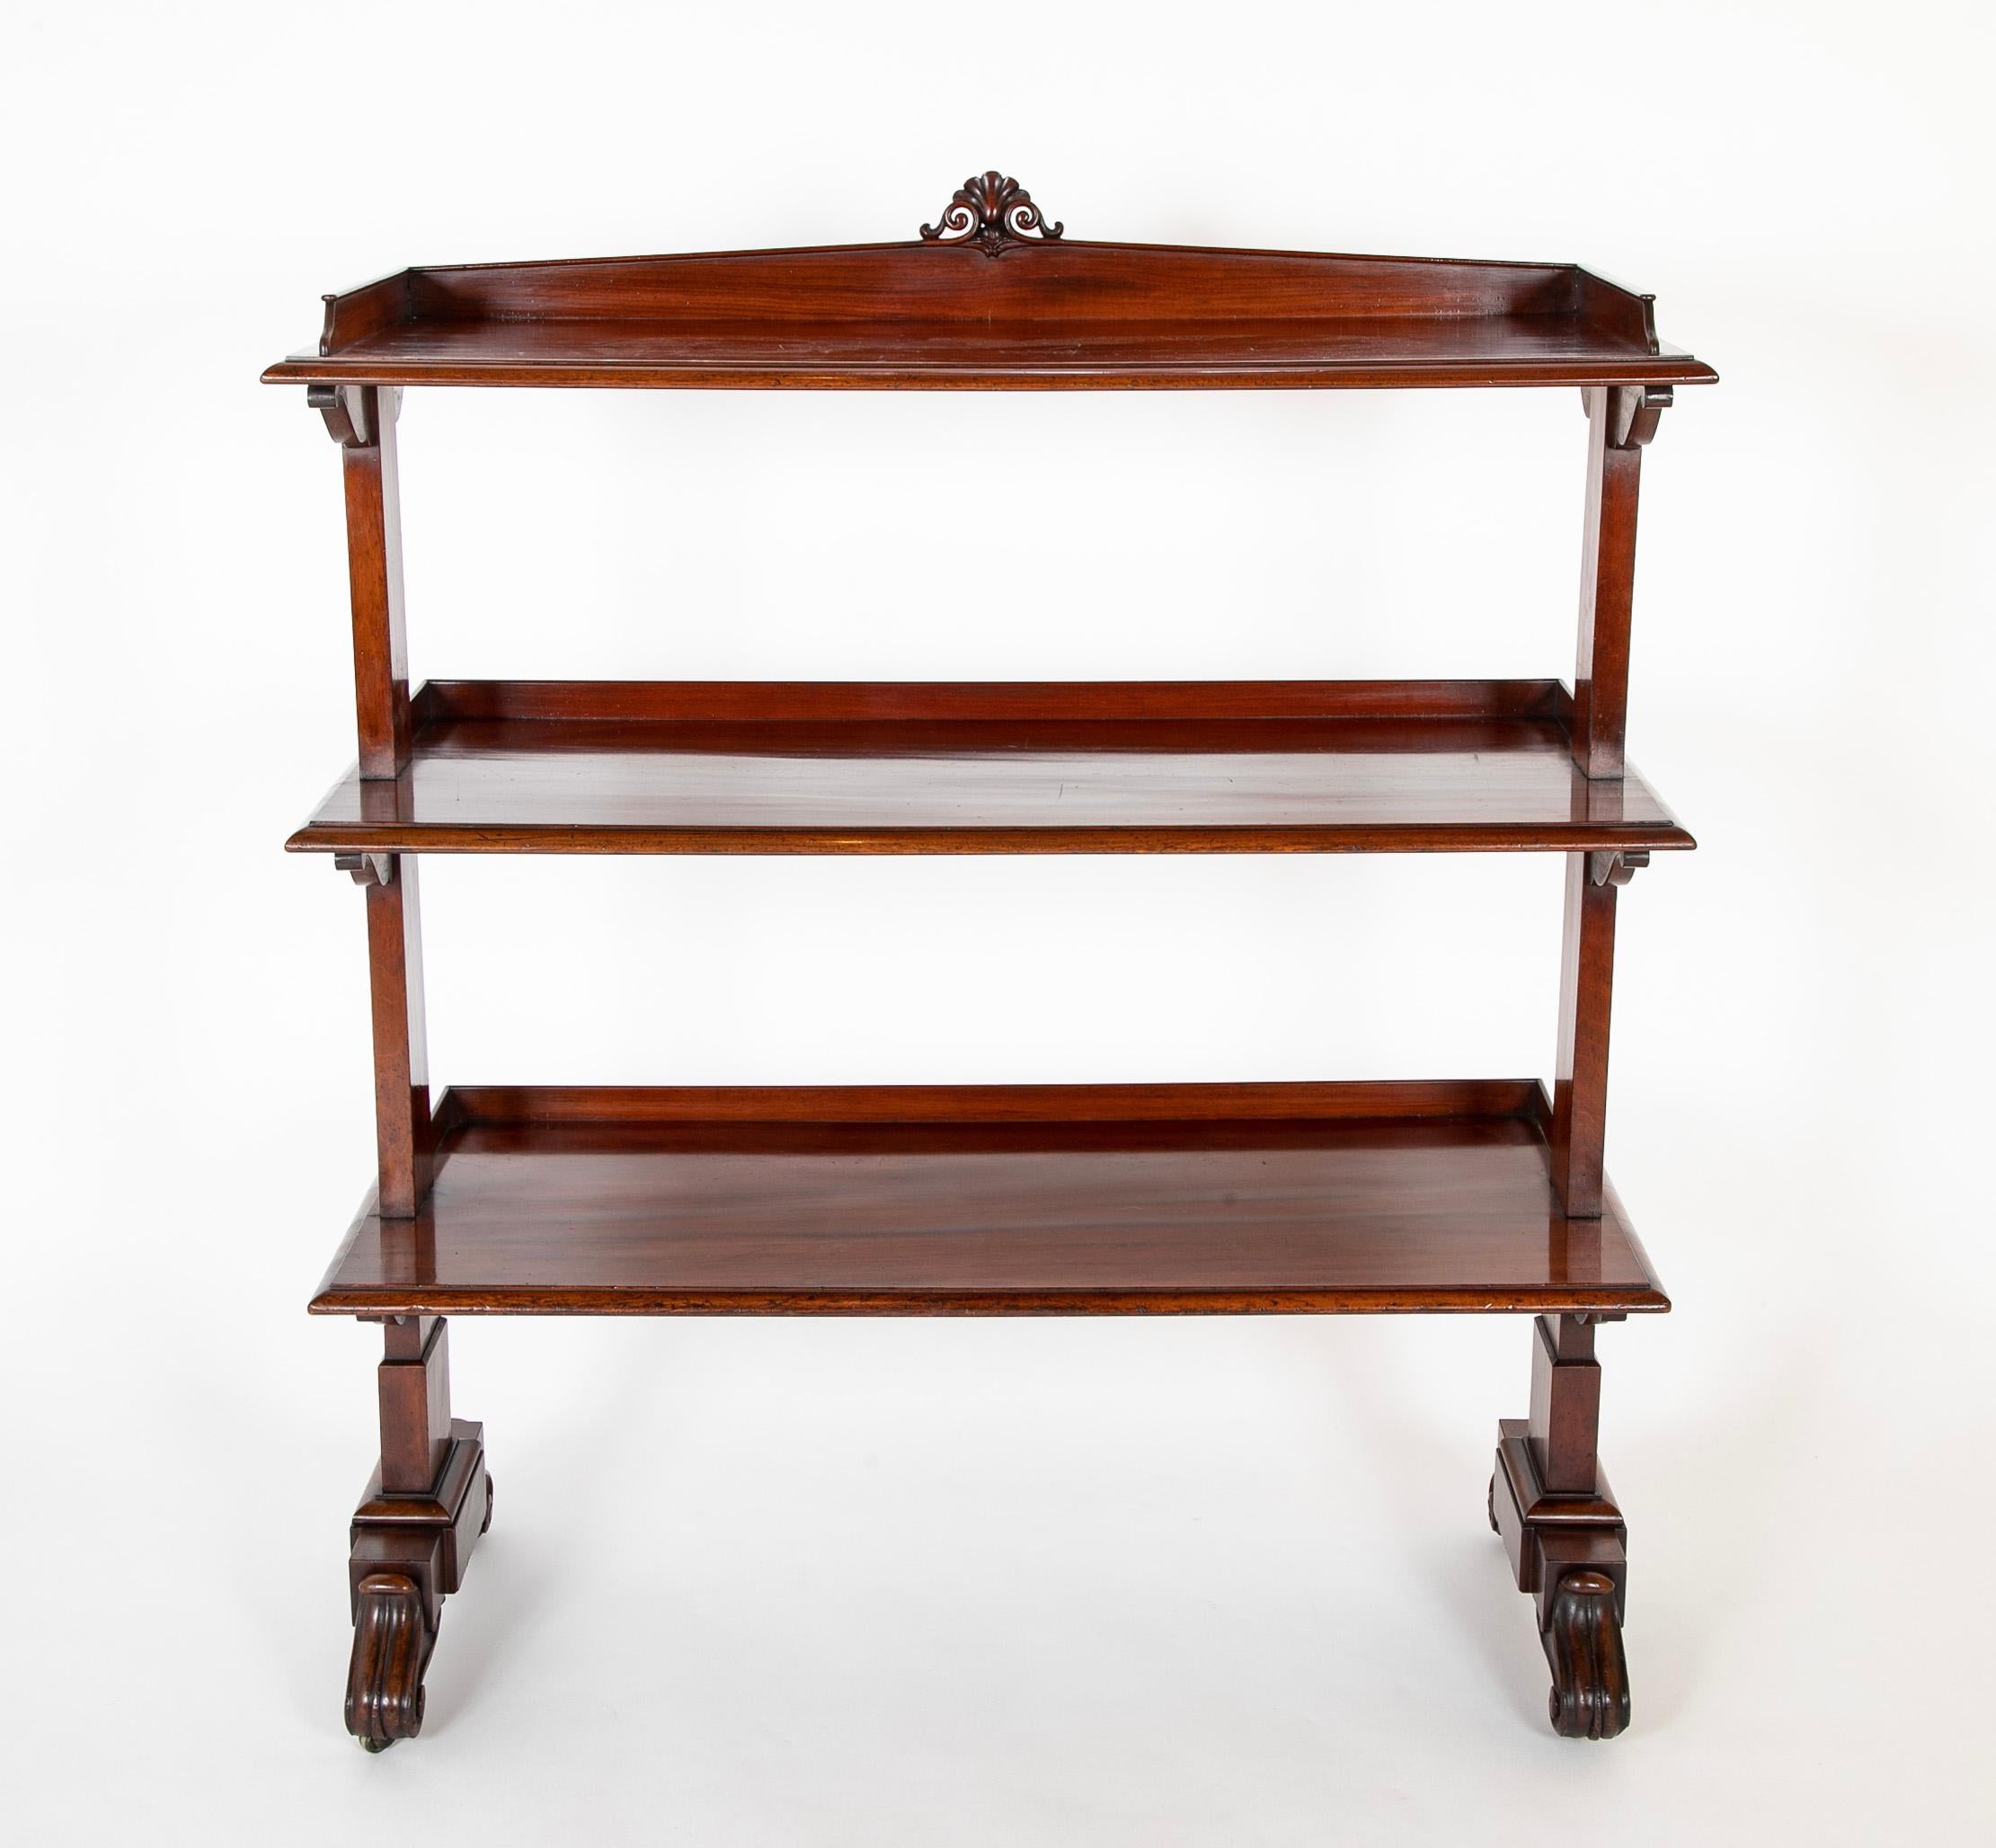 19th Century English William IV mahogany three tier etagere, also called a dumbwaiter as it was originally used as a food buffet. With three graduated shelves with raised molding on the backs. Beautiful hand carved details. This piece makes a